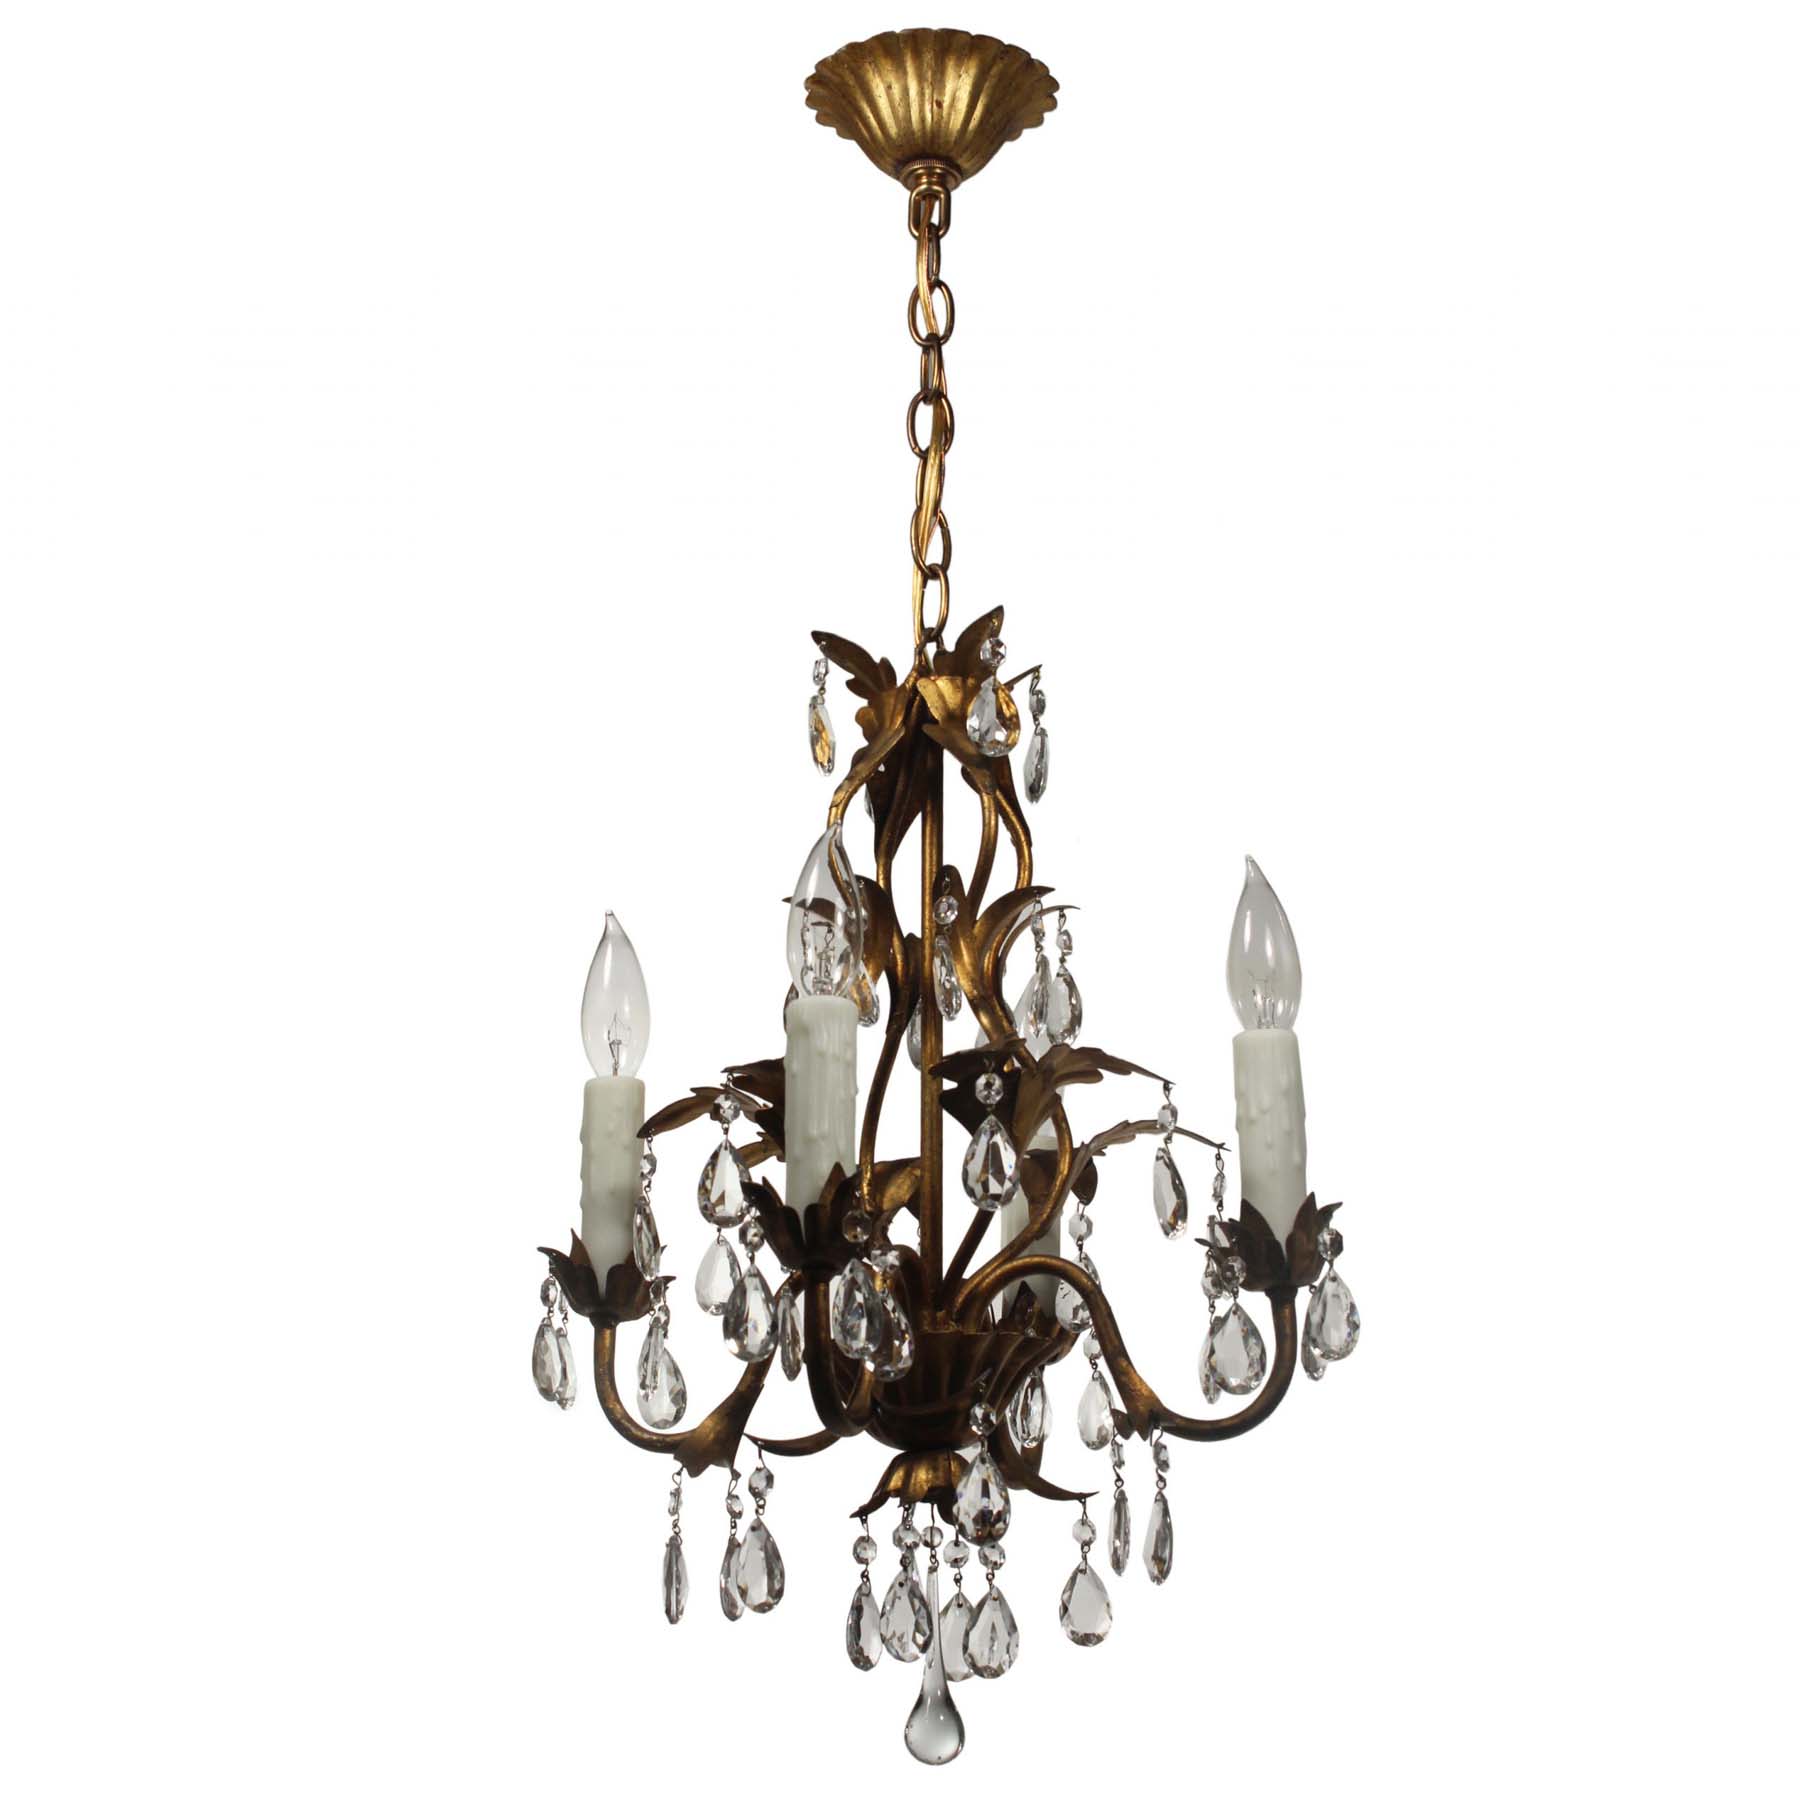 SOLD Vintage Neoclassical Brass Chandelier with Prisms-67525